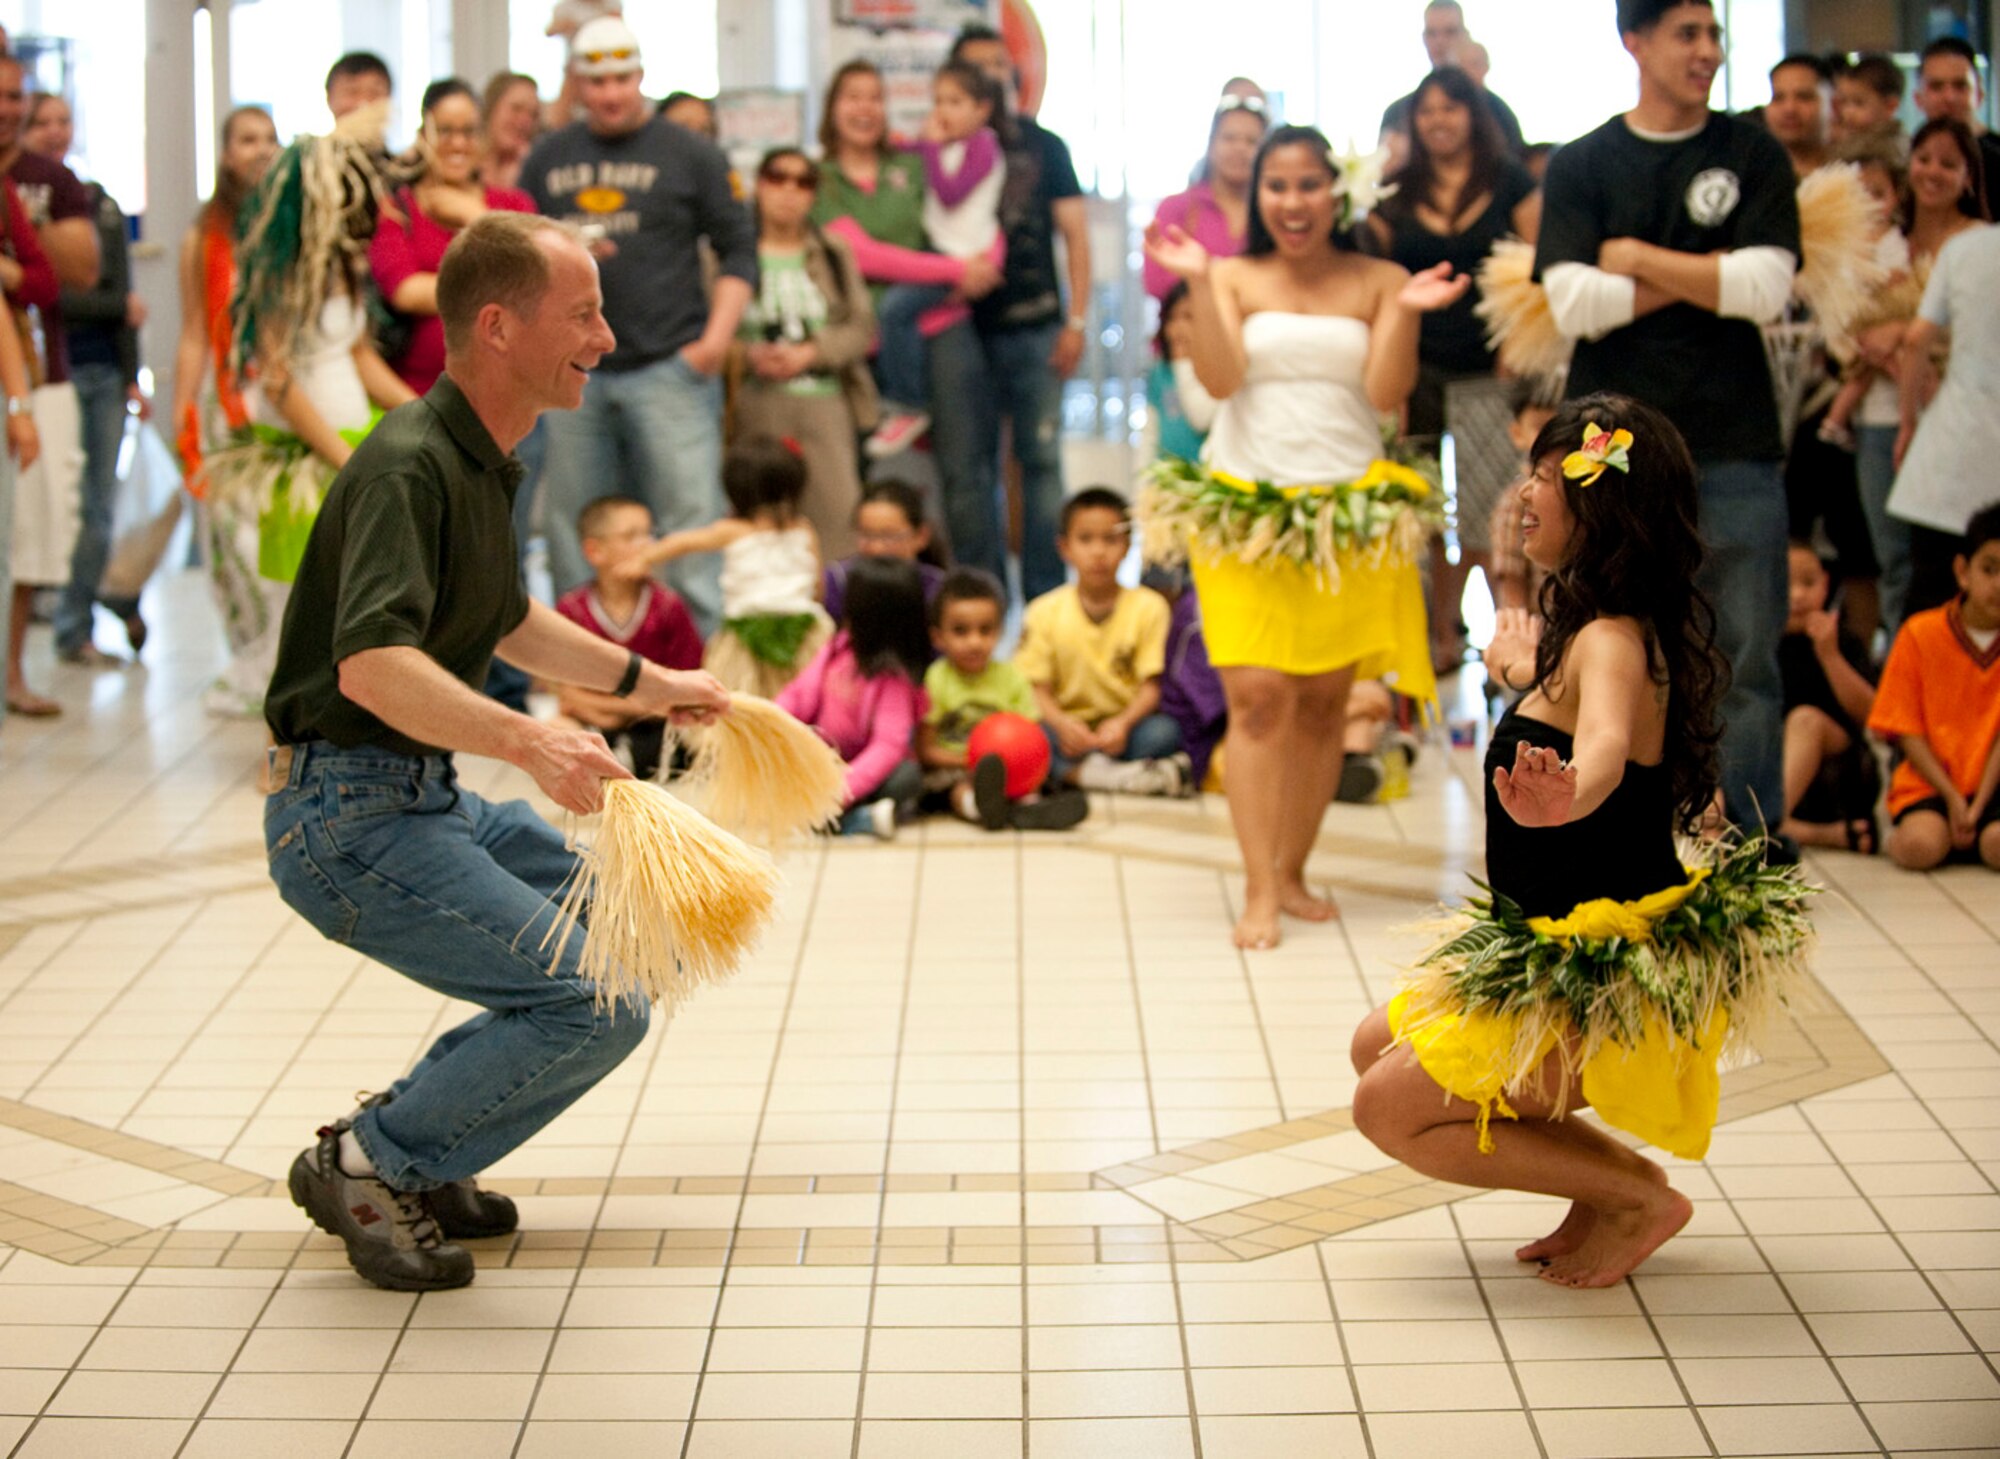 MISAWA AIR BASE, Japan -- Col. David Stilwell, 35th Fighter Wing commander, dances with a hula dancer at the Misawa Base Exchange May 16, 2009. The dancers solicited audience members to try hula dancing for themselves. (U.S. Air Force photo by Staff Sgt. Samuel Morse)